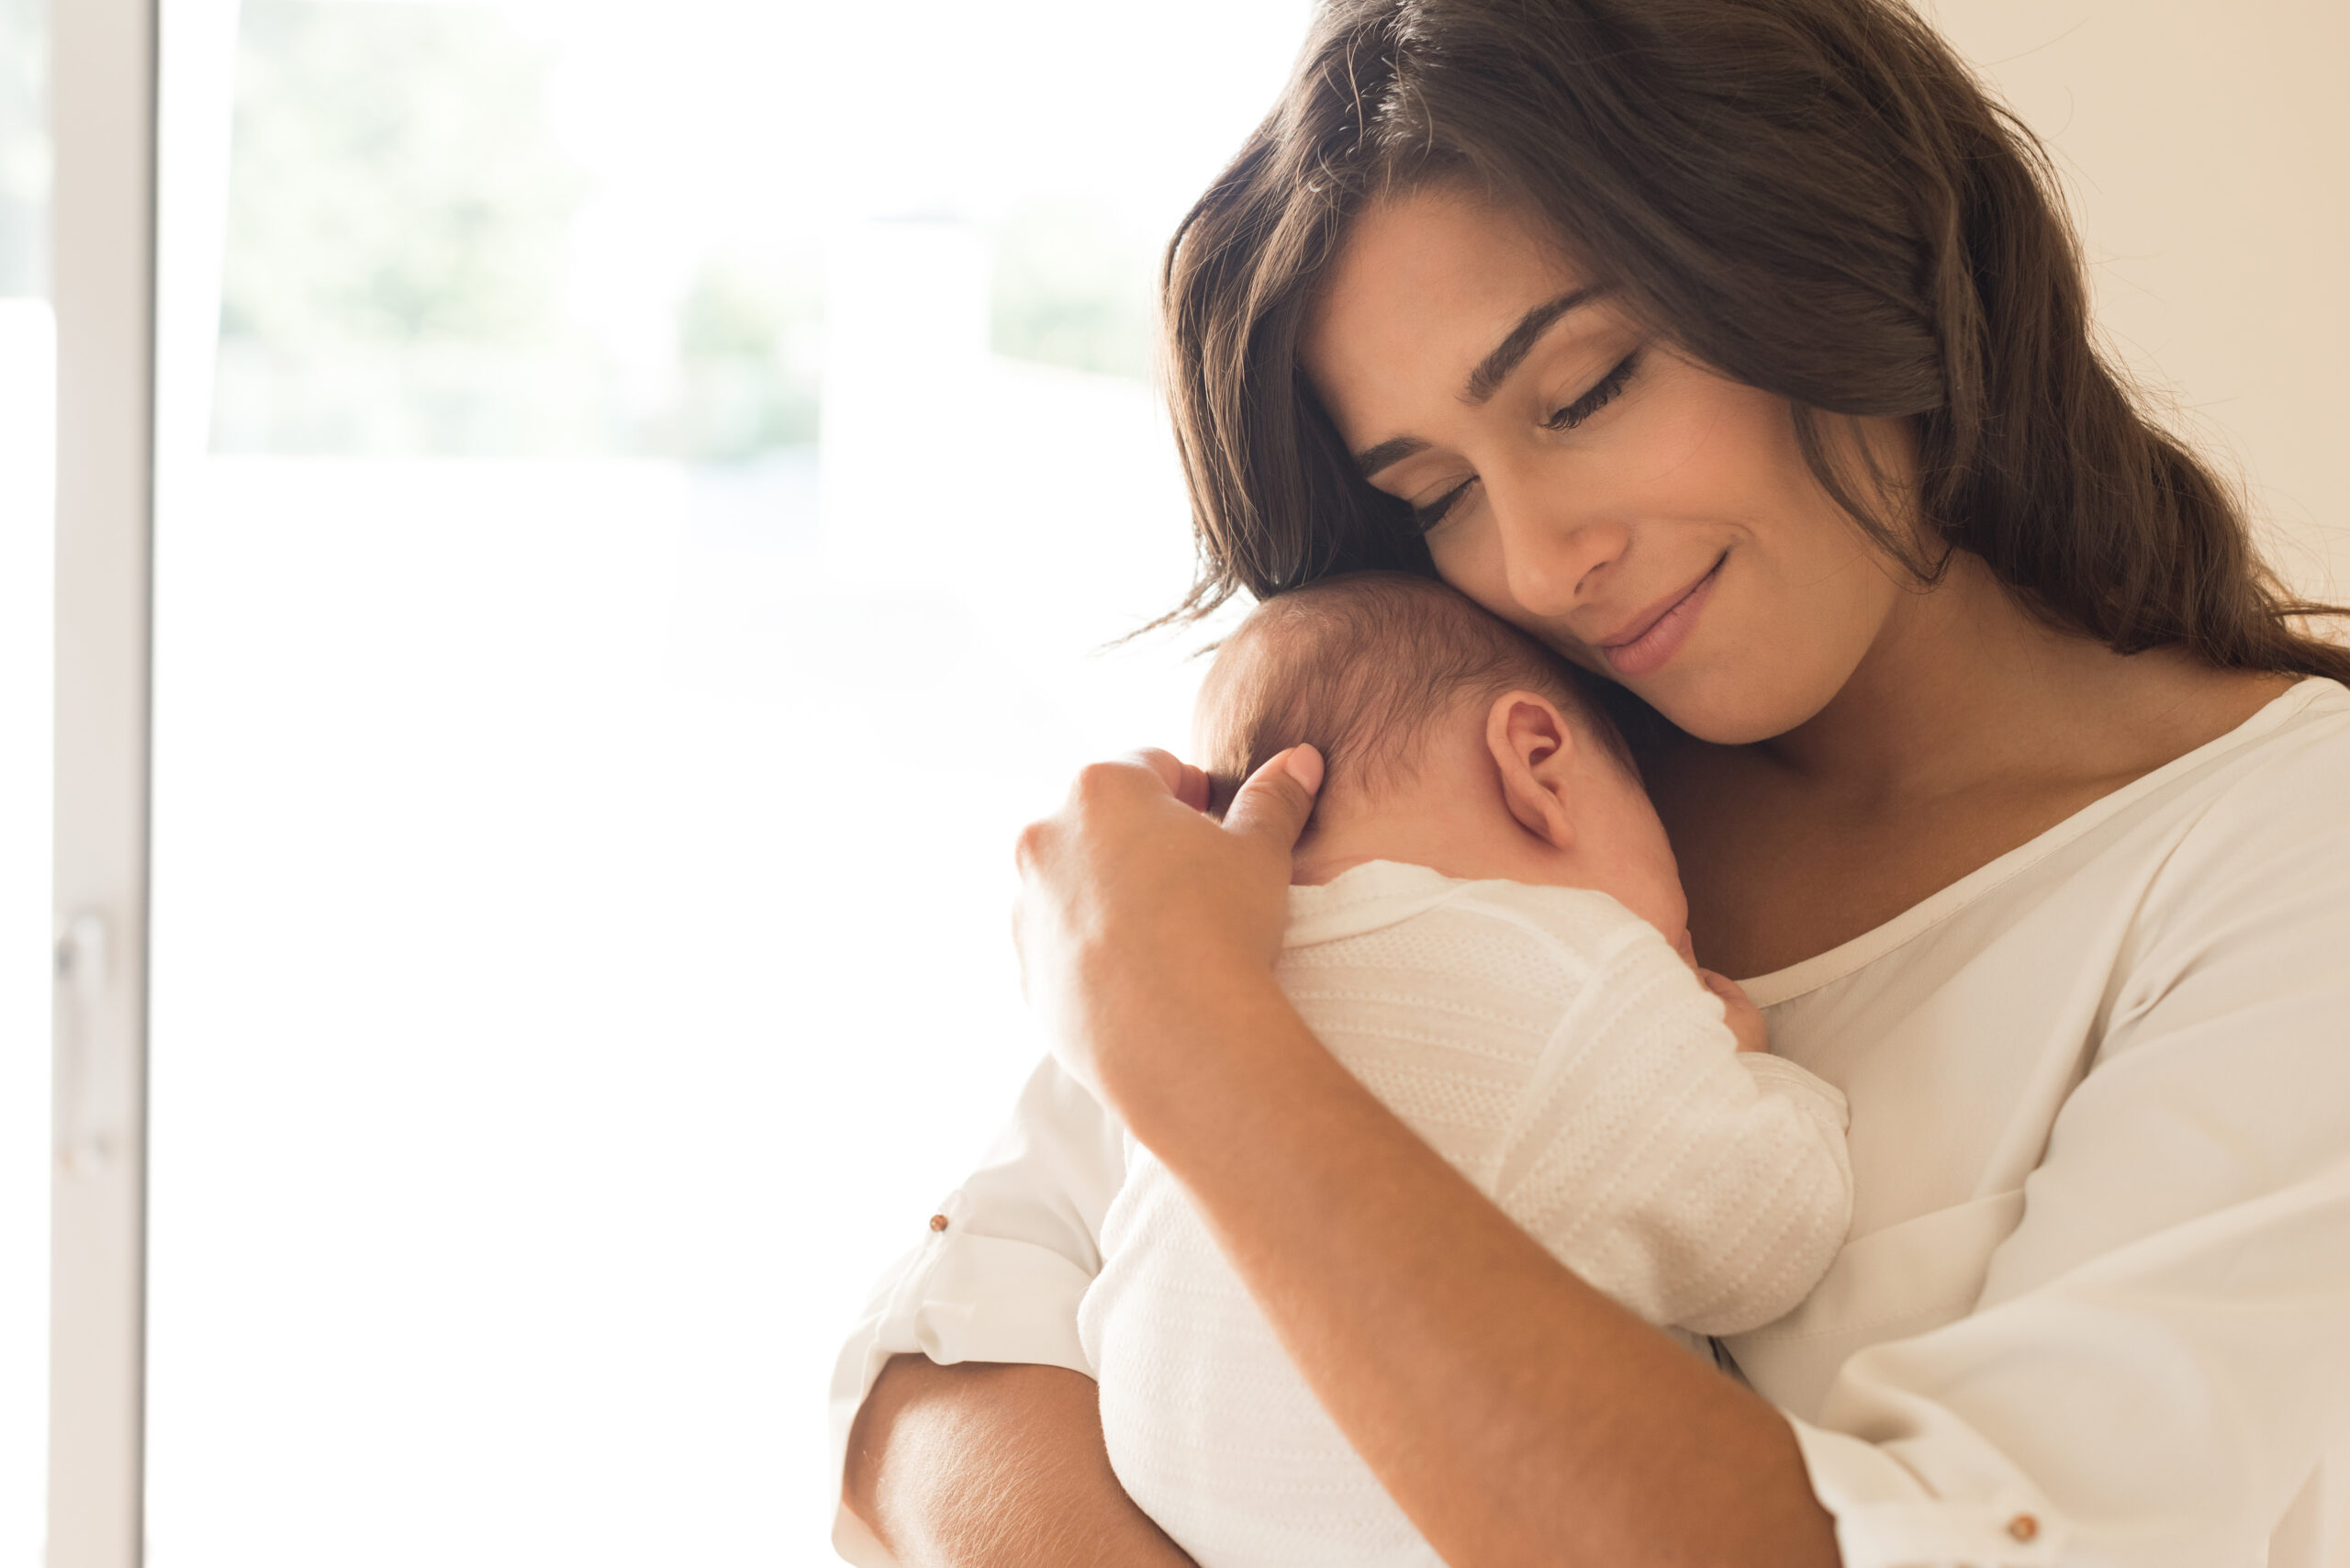 Pretty,Woman,Holding,A,Newborn,Baby,In,Her,Arms